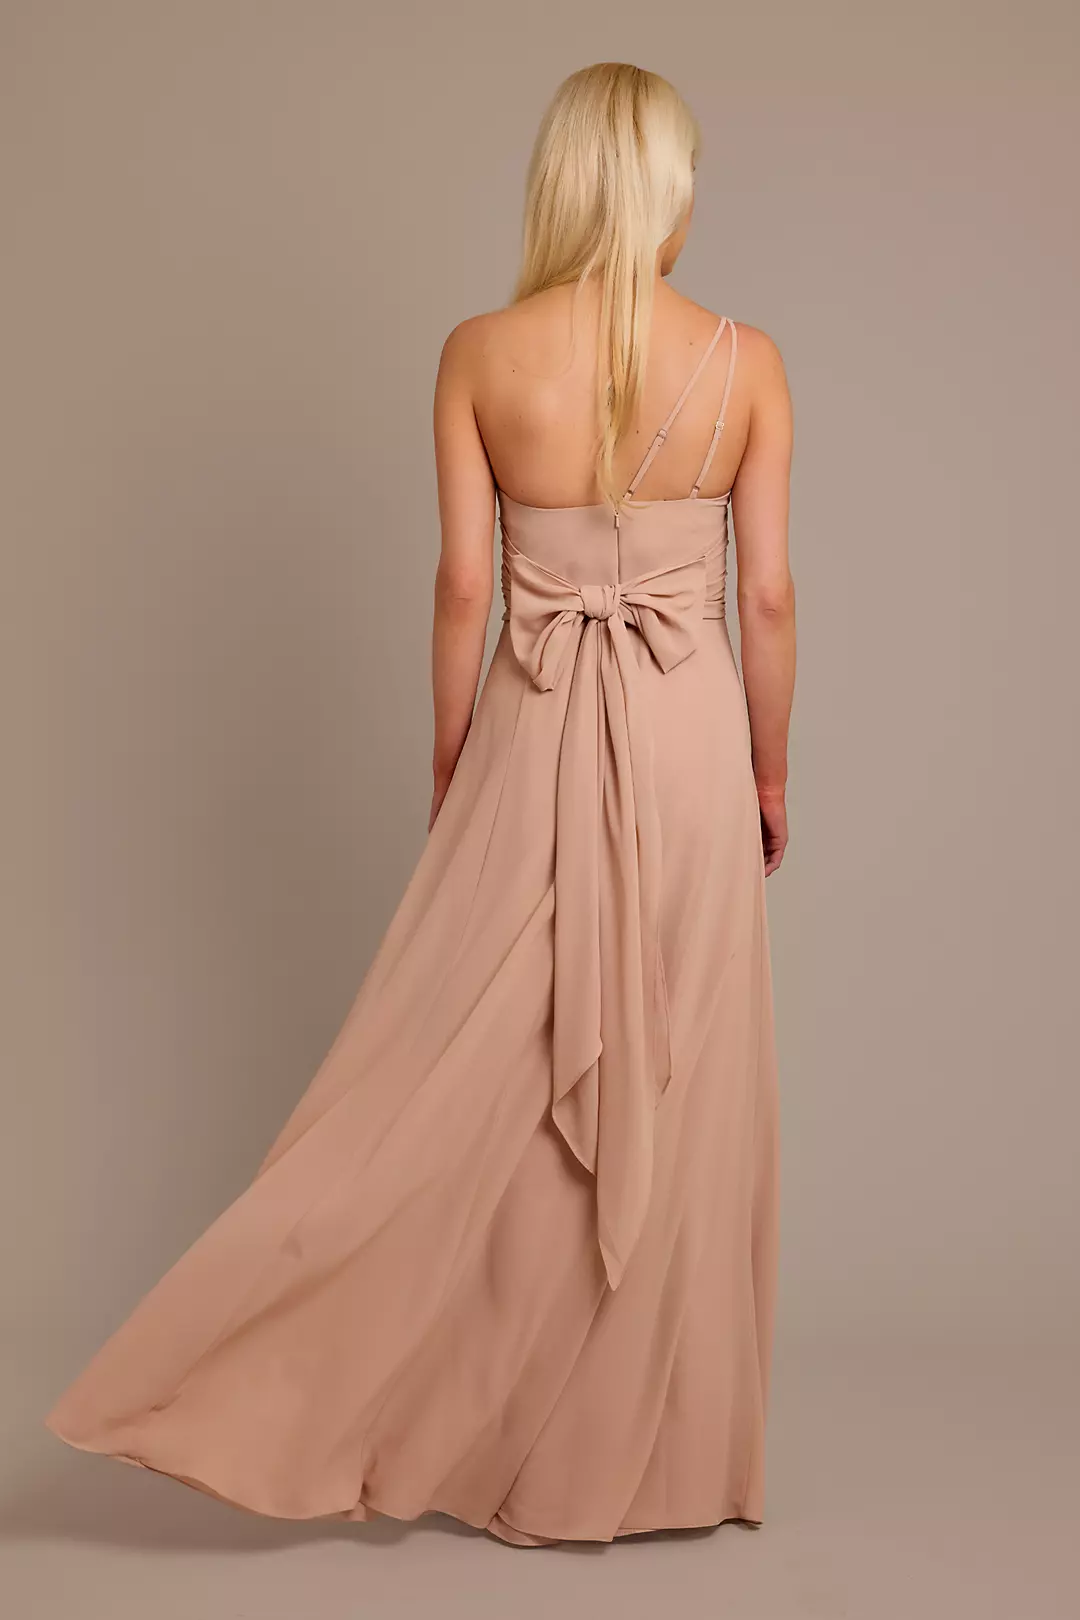 Chiffon One-Shoulder Dress with Tie Image 2